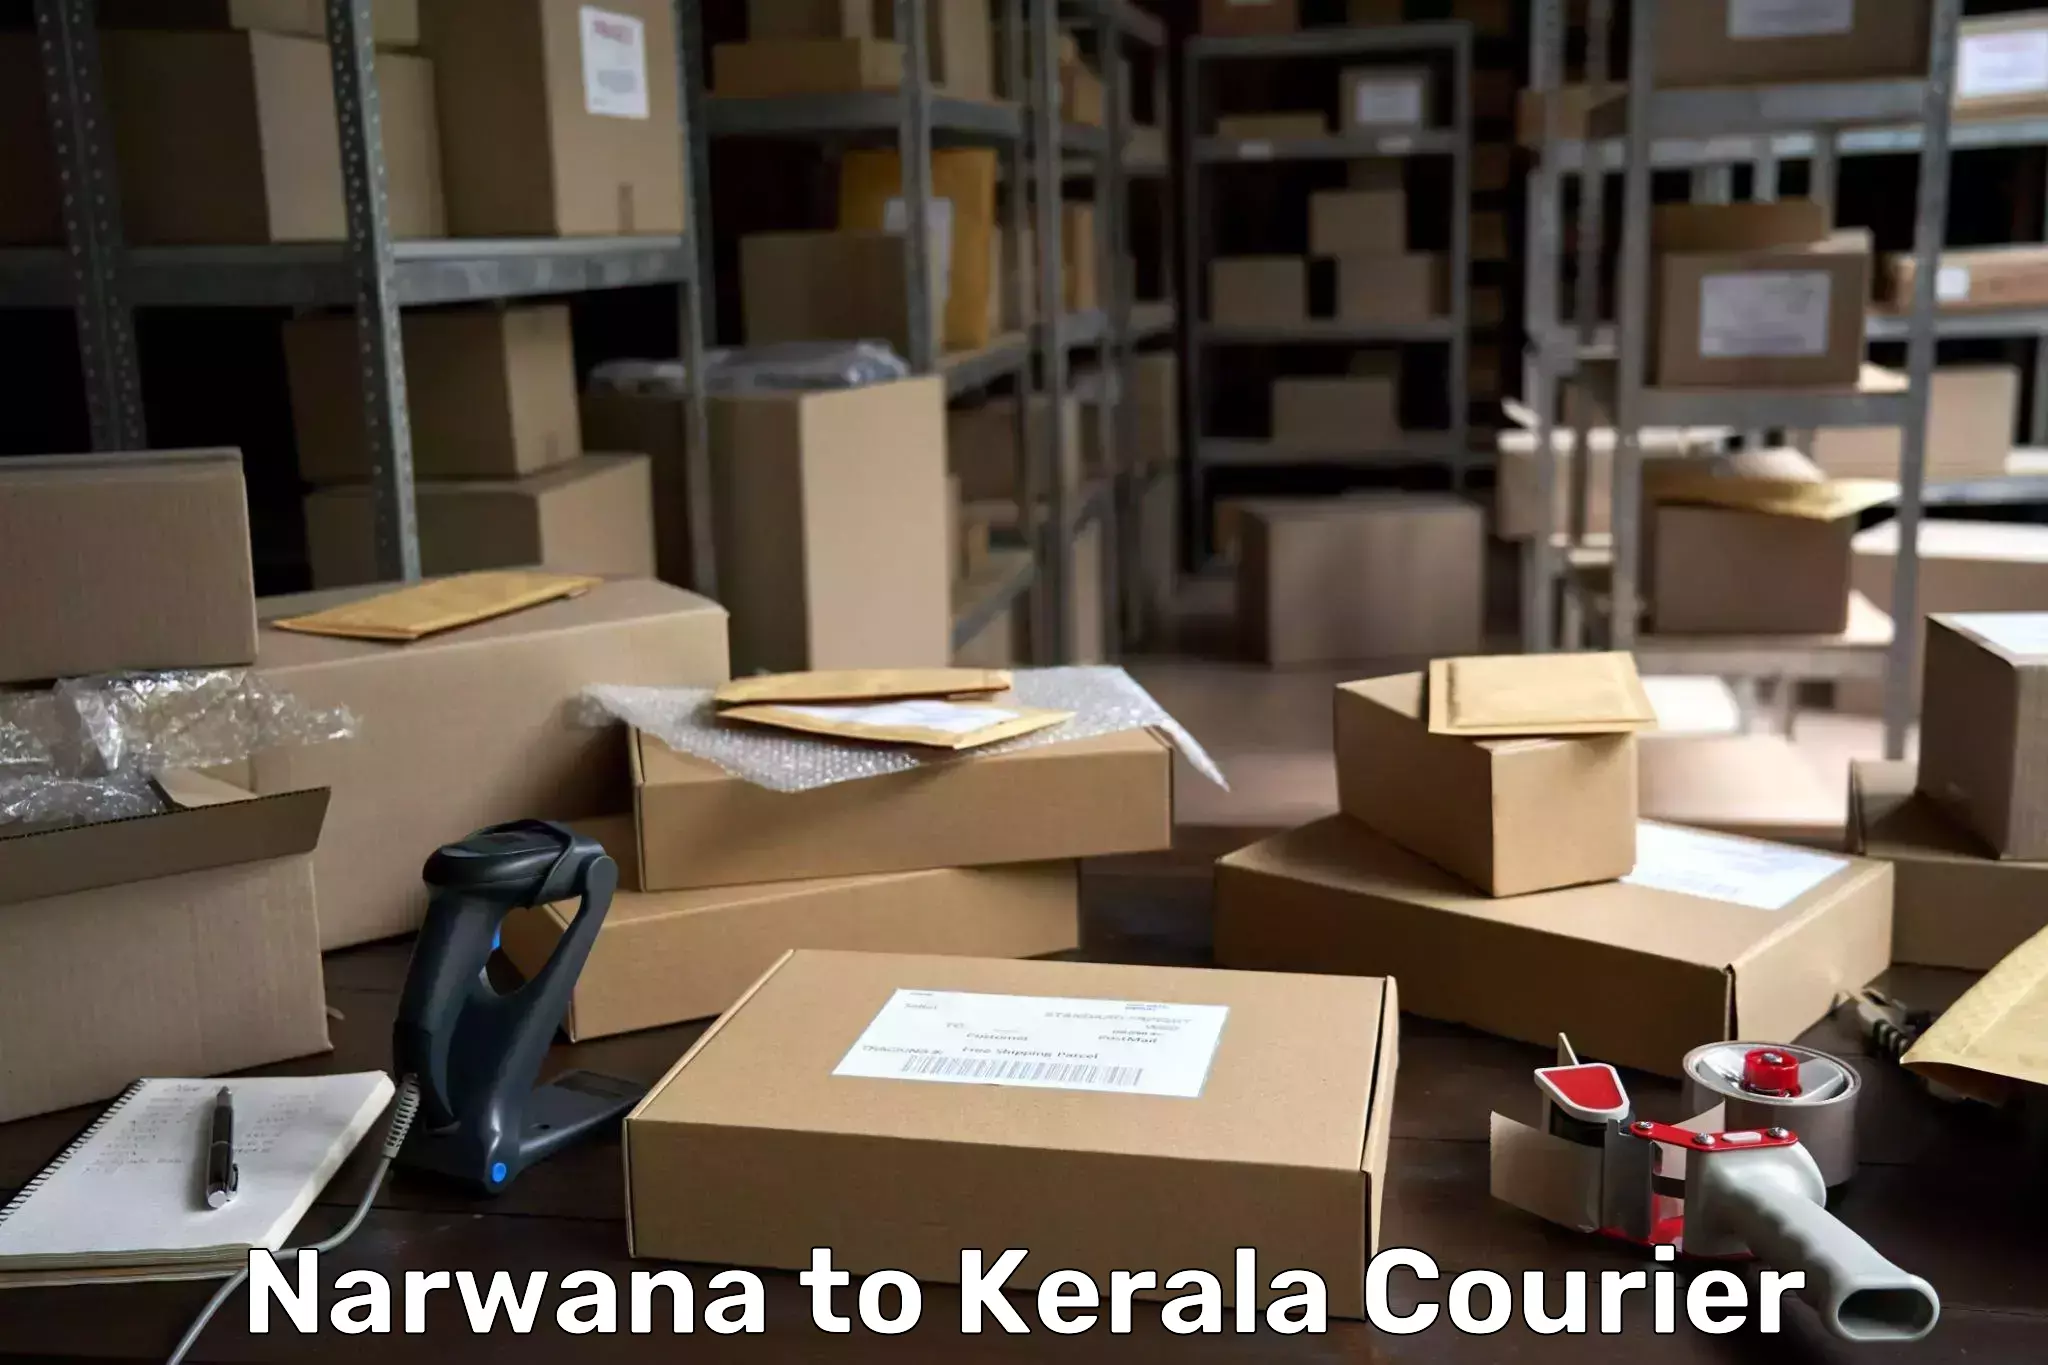 Express delivery network Narwana to Ponnani